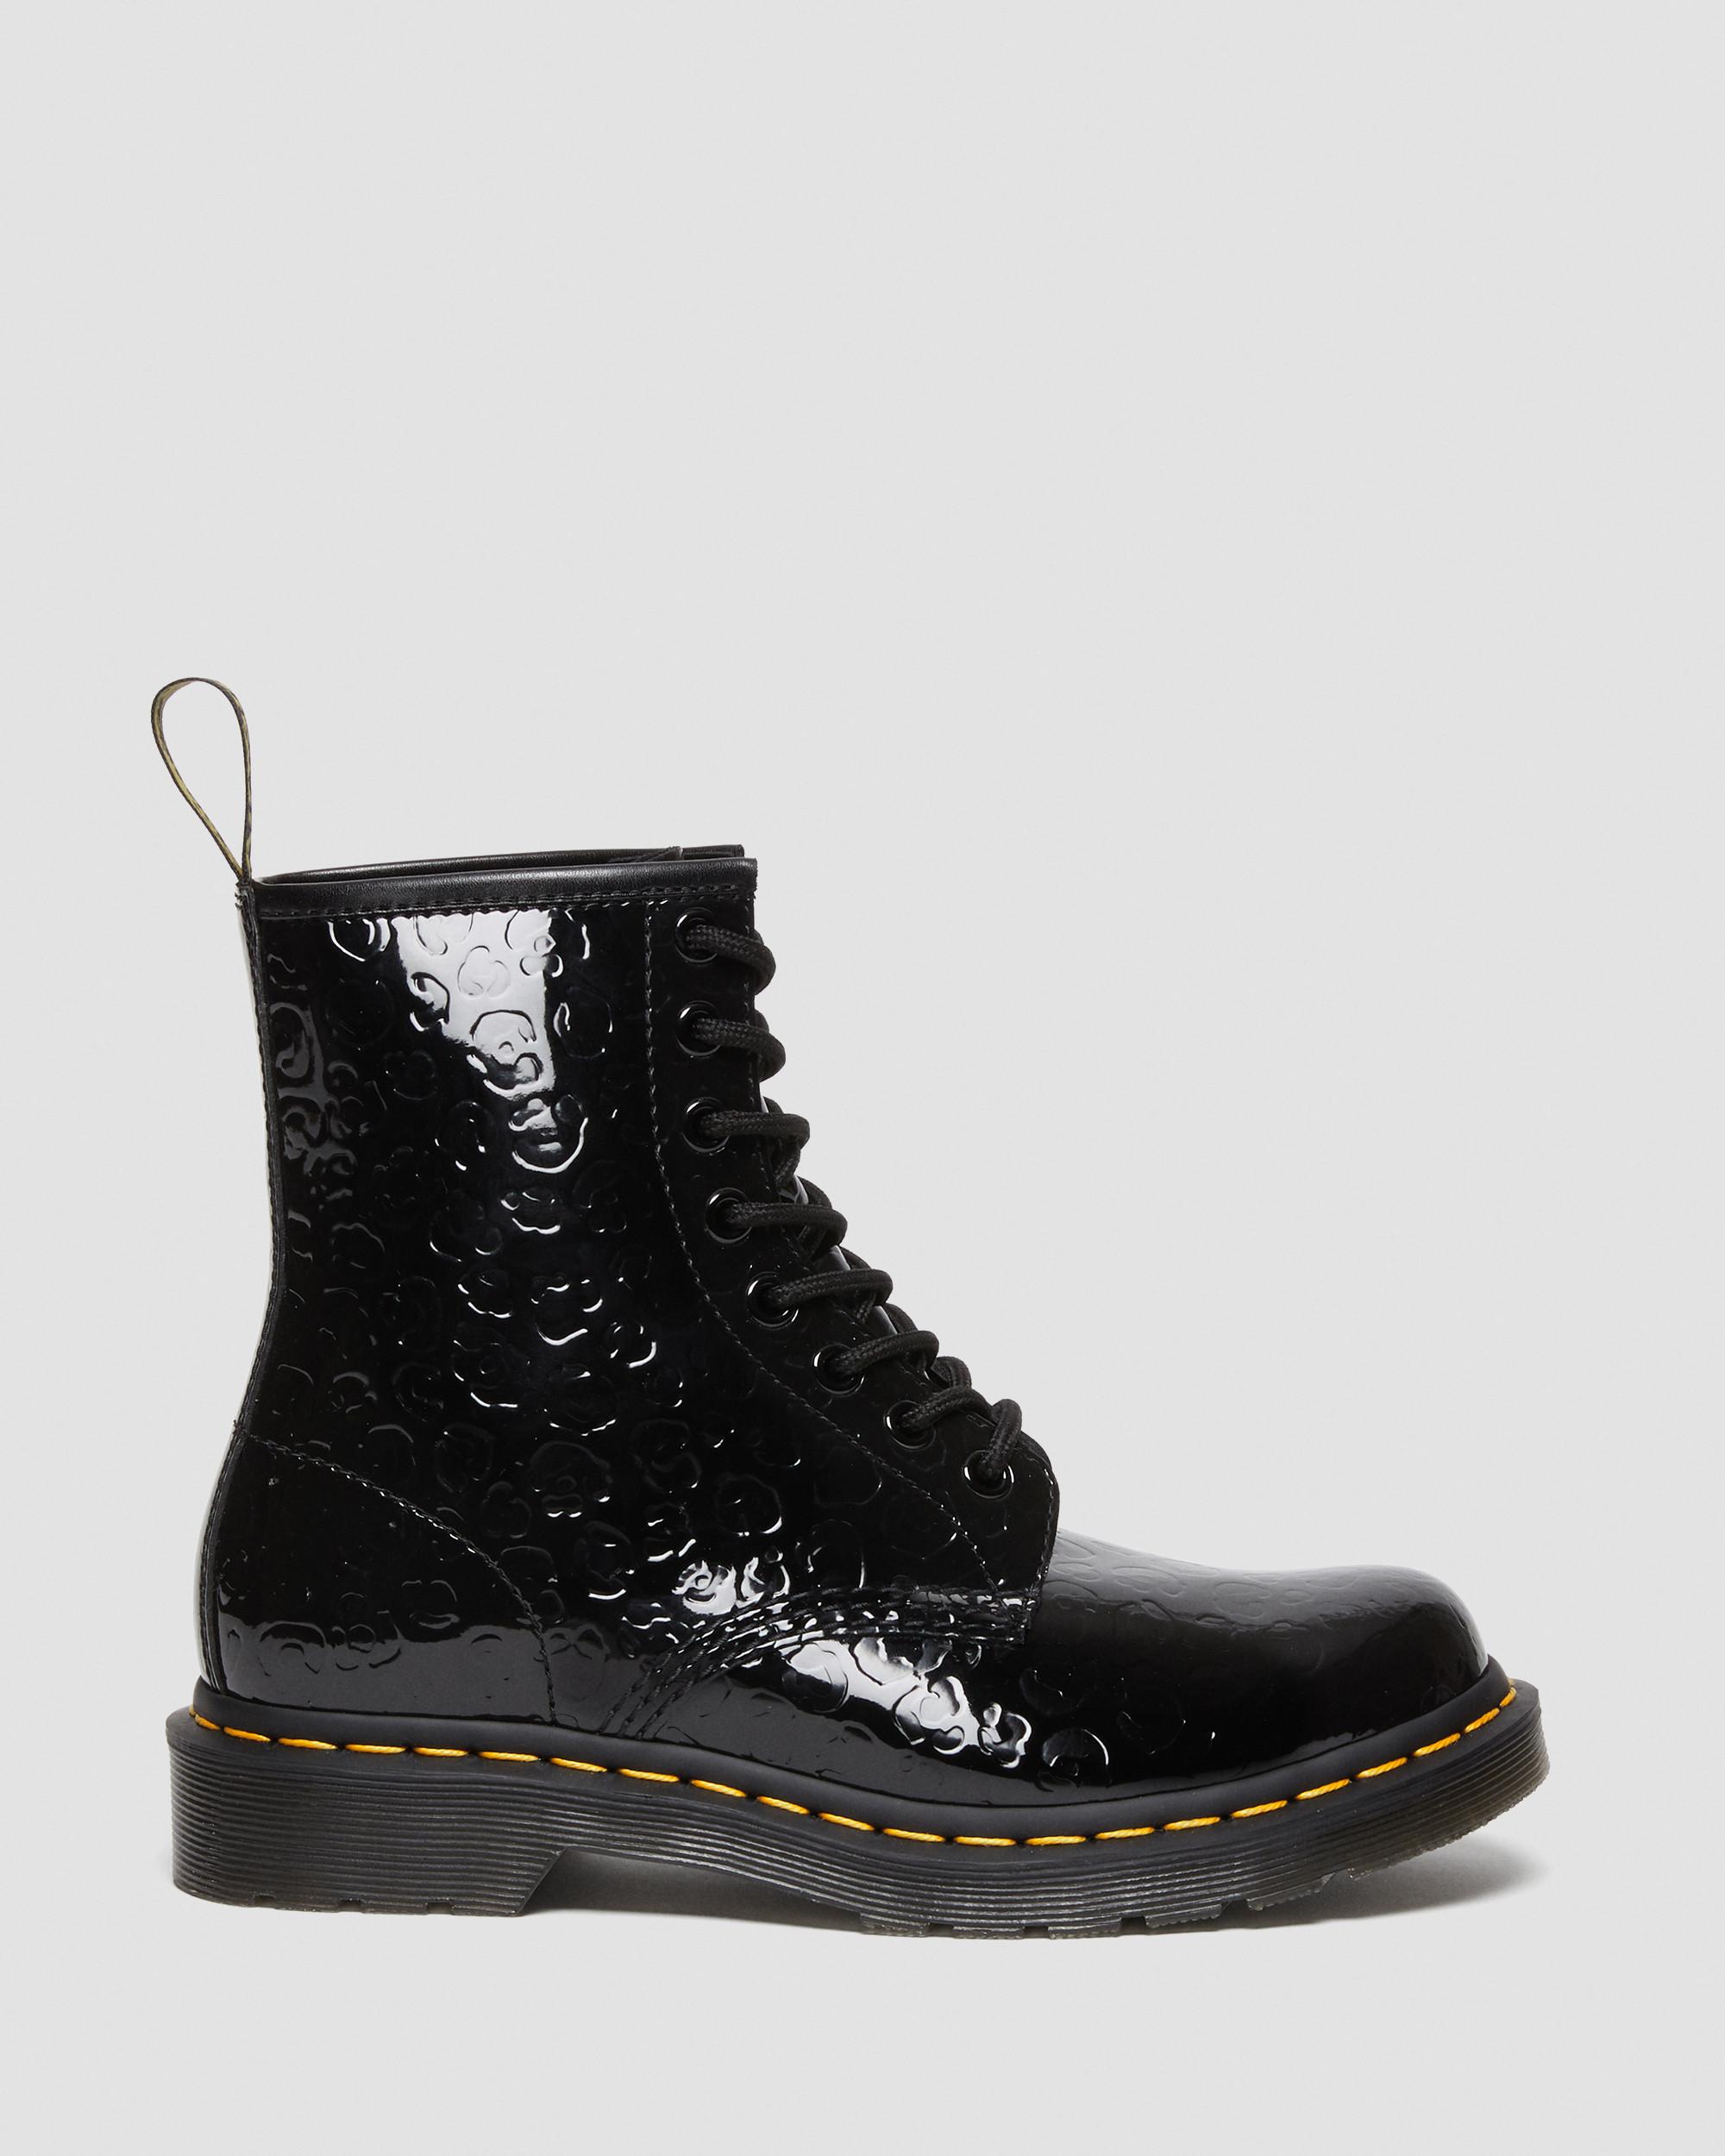 1460 Leopard Emboss Patent Leather Boots | Dr. Martens